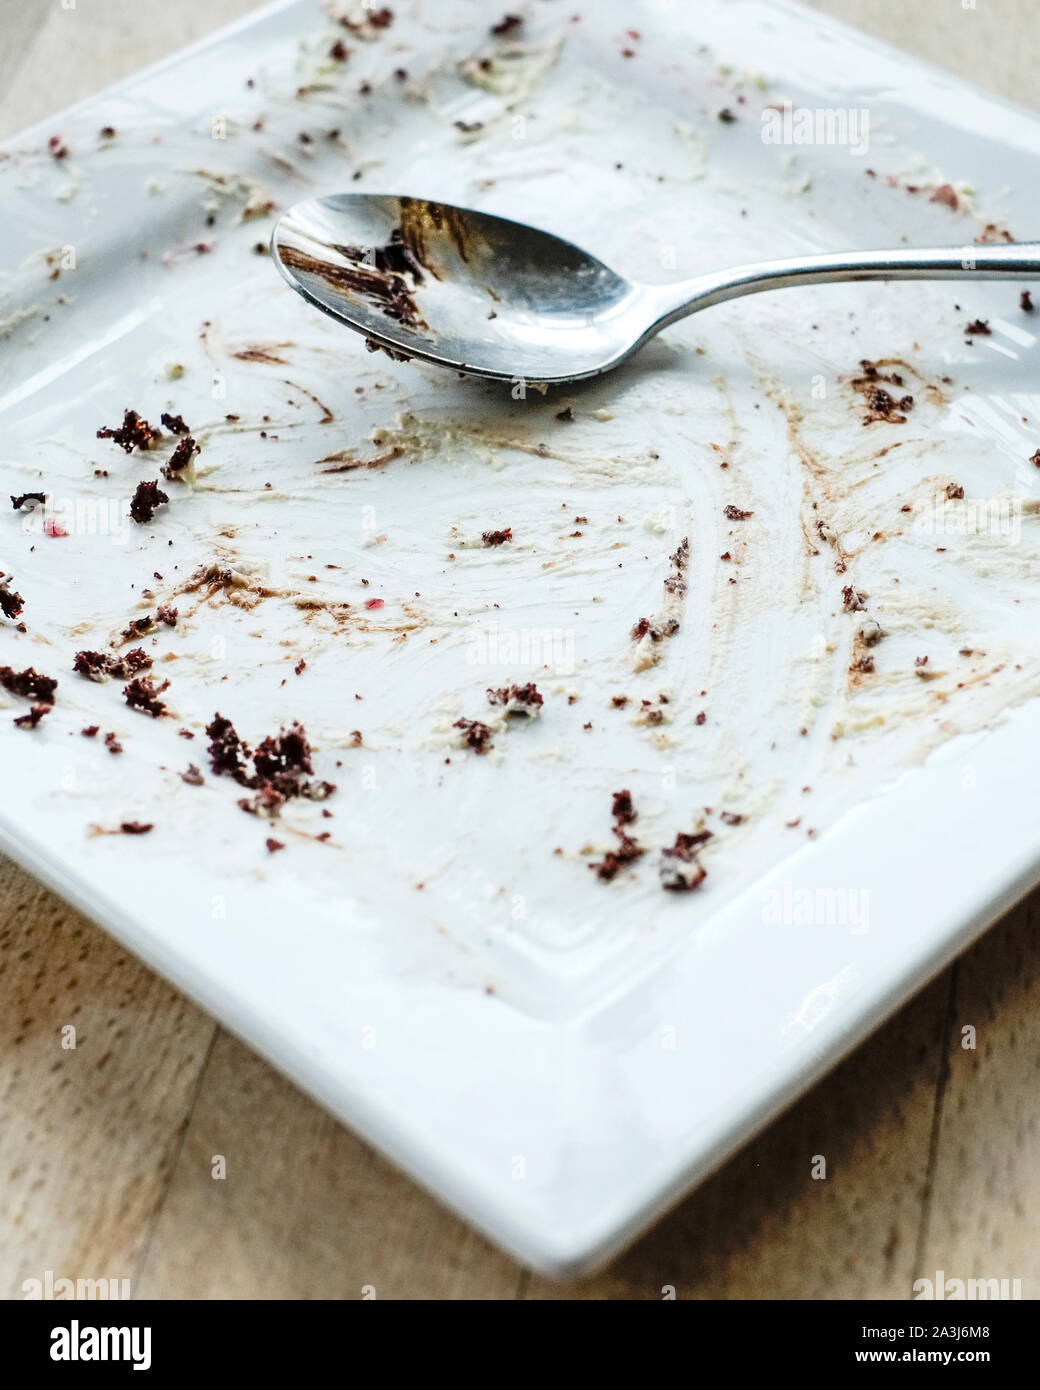 A spoon resting on an empty square plate after a chocolate dessert has been eaten in a restaurant. Stock Photo